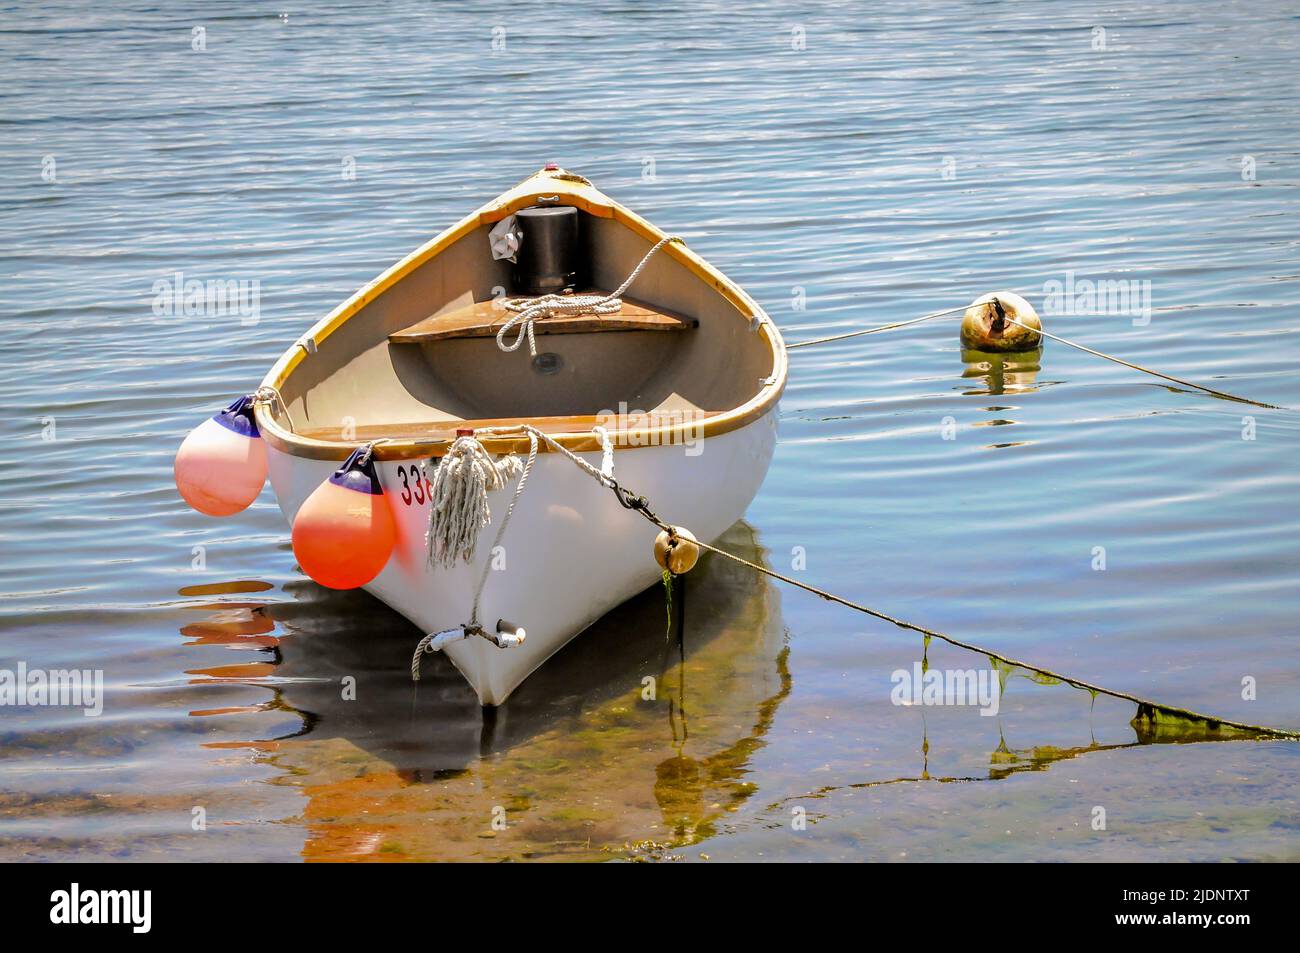 This small whaling boat dingy tied up just off shore is one of the best dinghies anyone could own, and it looks like its owner cares for it very much Stock Photo